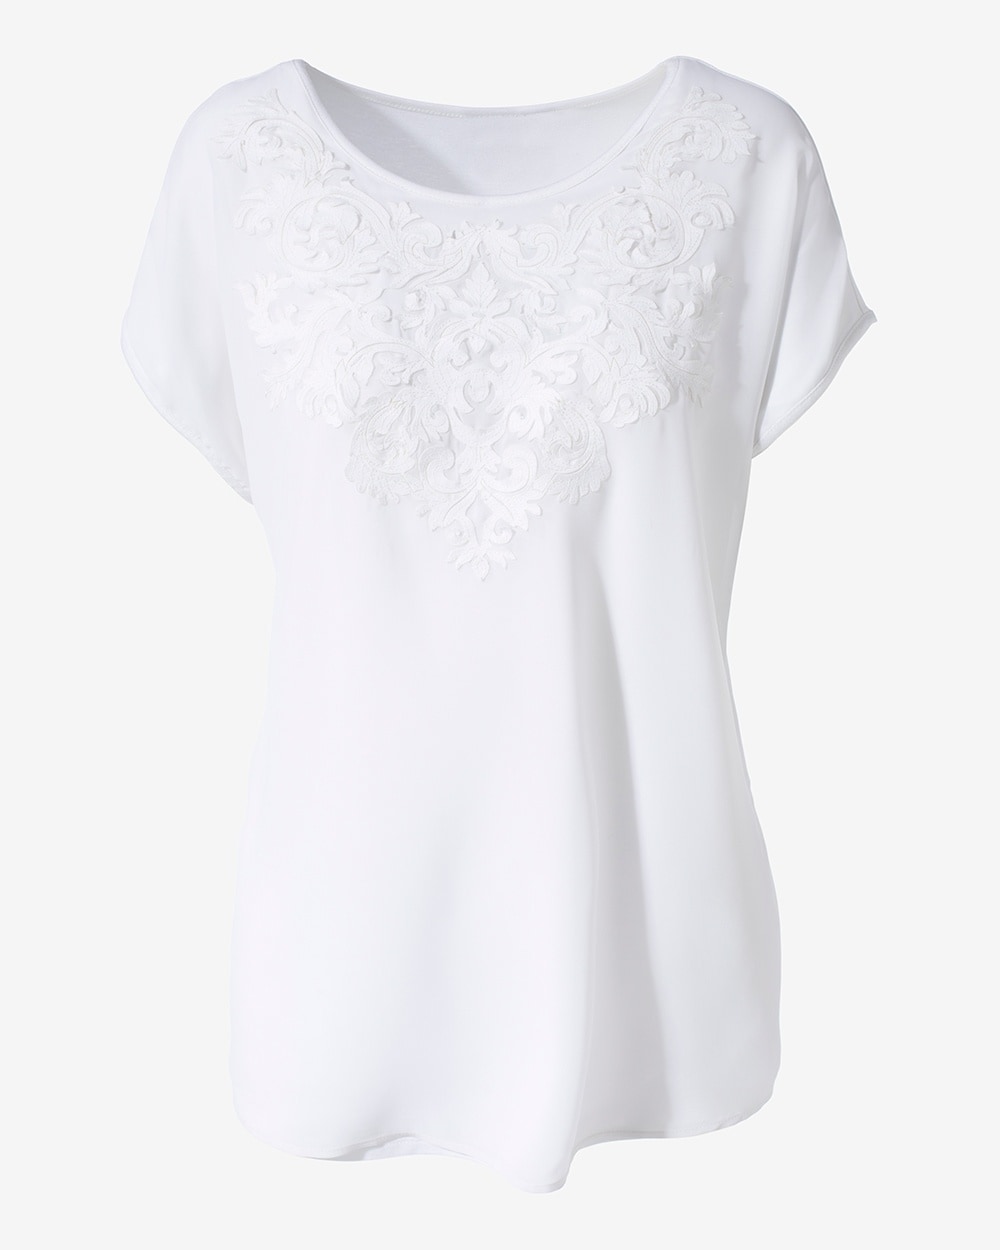 Easywear Embroidered Short Sleeve Tunic